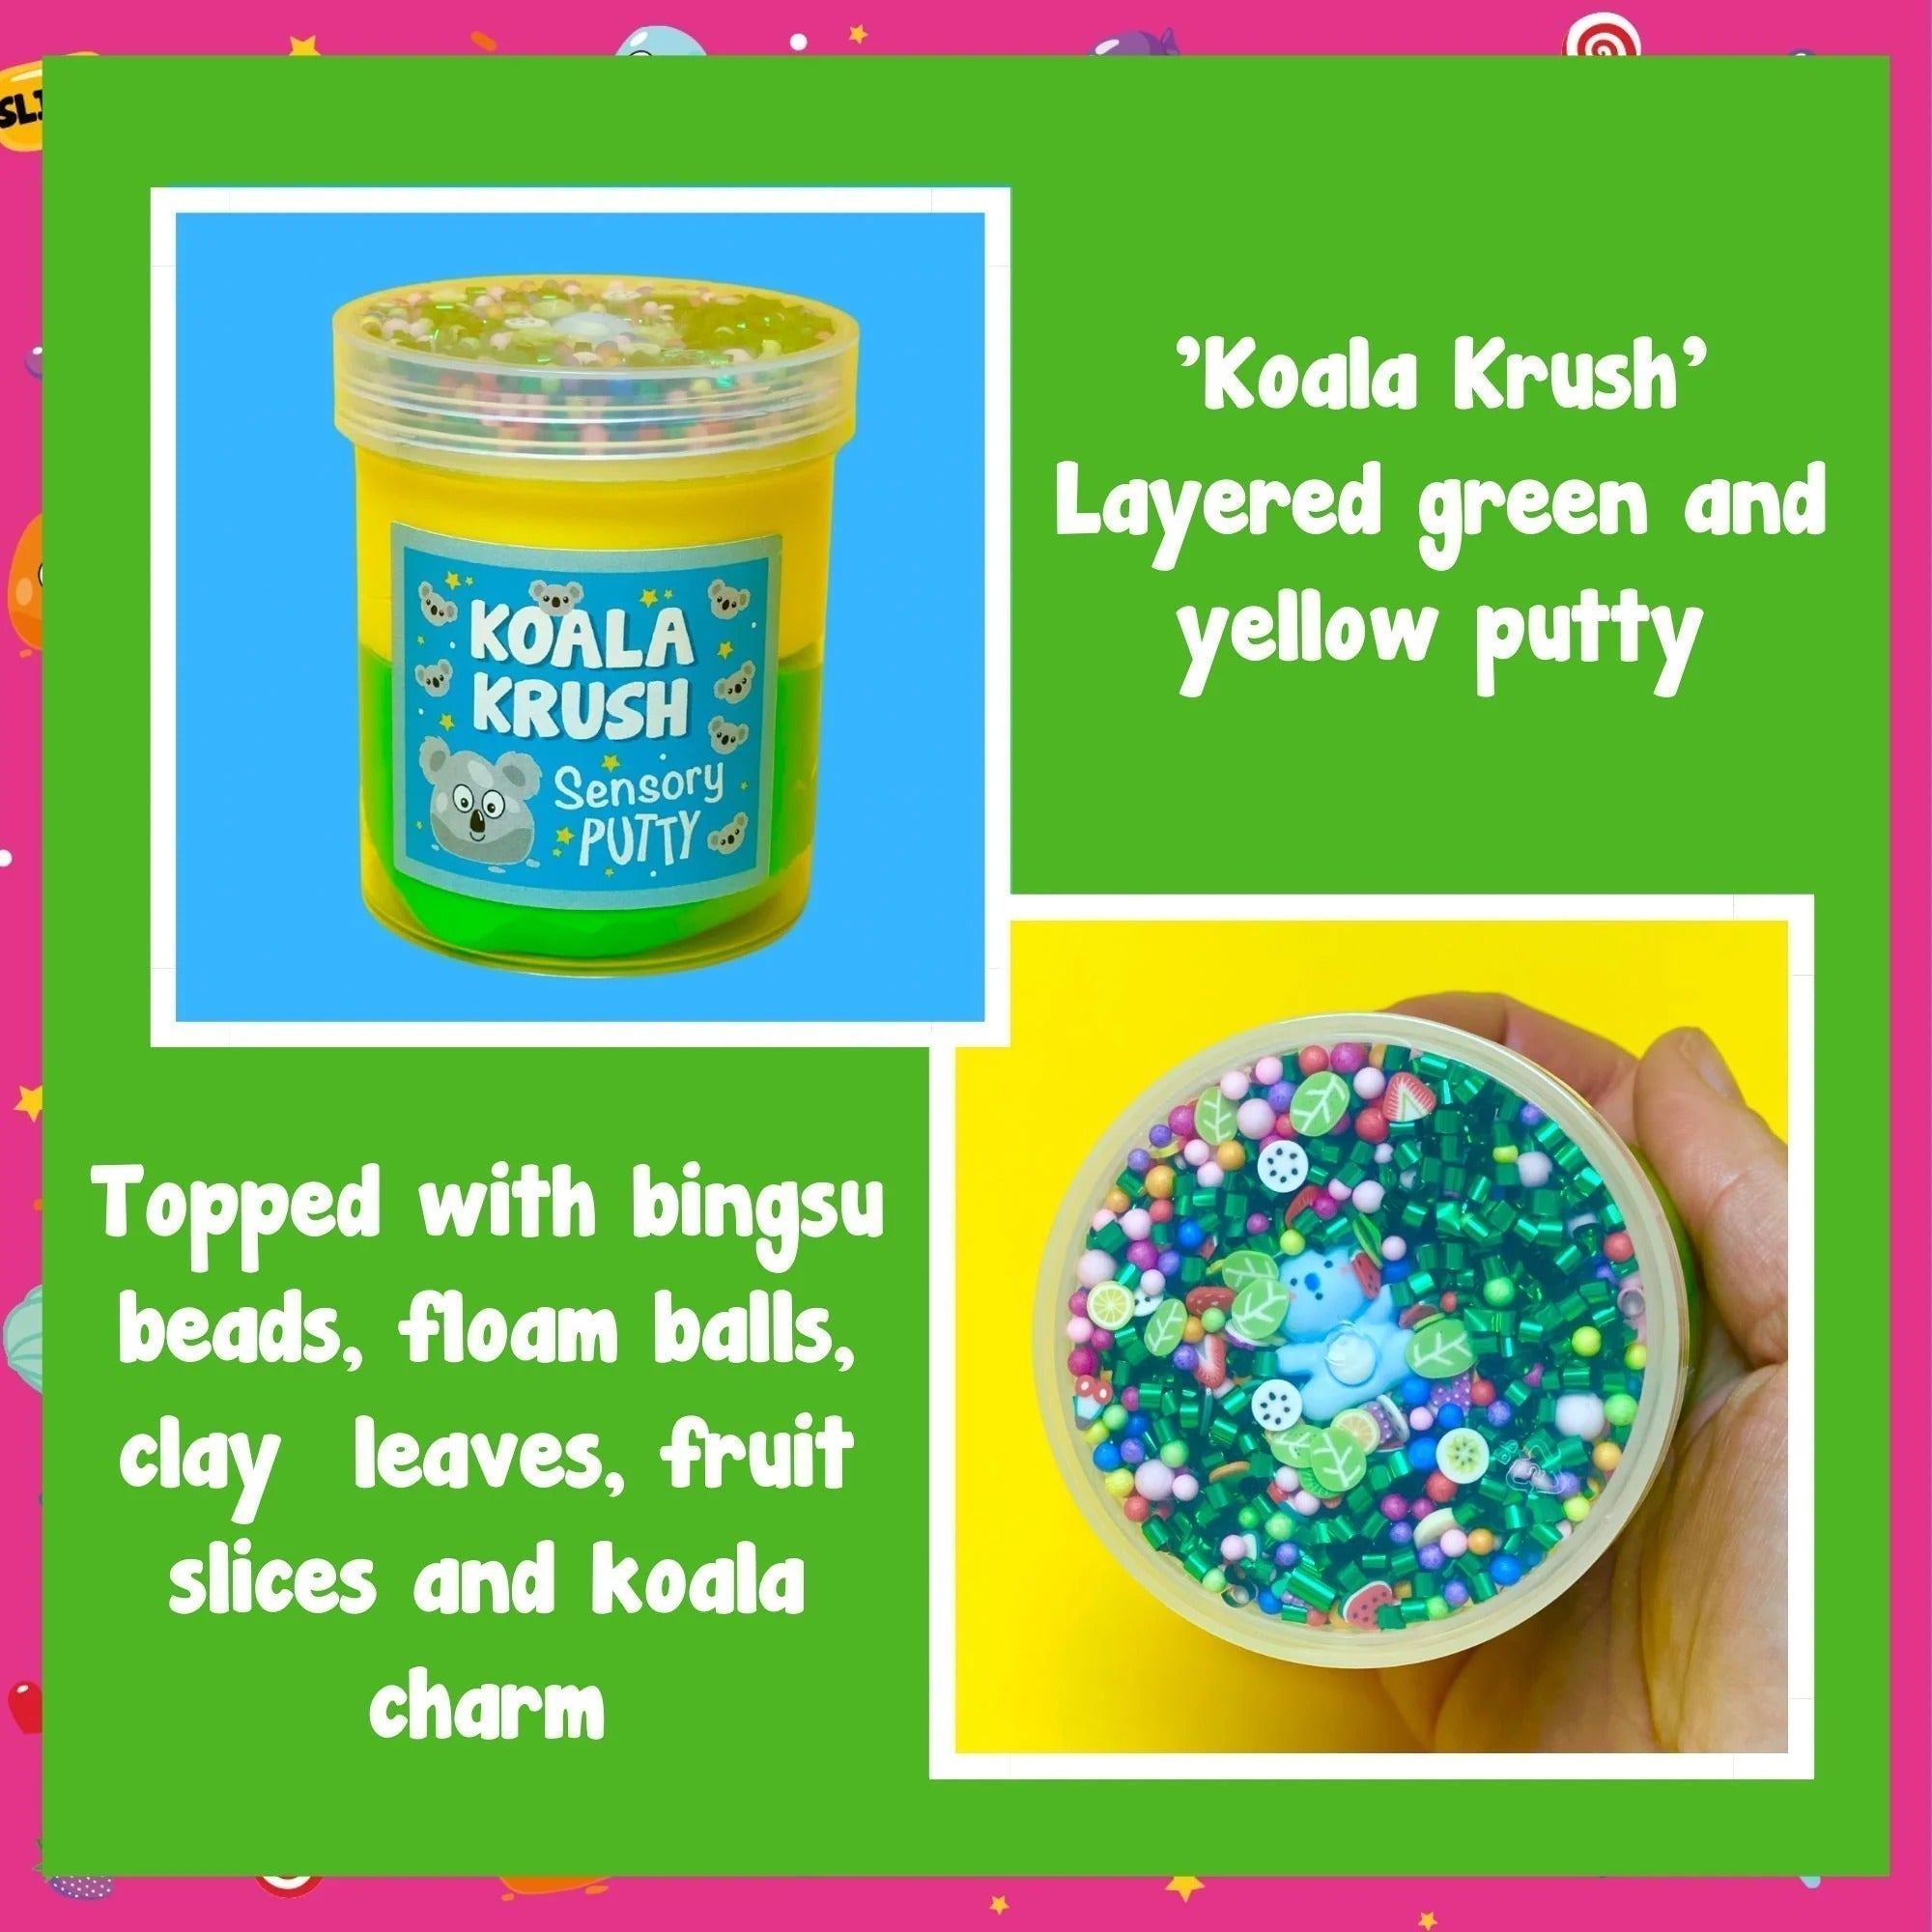 Koala Krush Putty, Your favourite fluffy friend has the perfect putty in store for you! Our Koala Krush putty has a duo of yellow and green putty, topped with rainbow floam balls, shimmering green bingsu beads, fruit themed sprinkles and an adorable koala charm, accompanied by a gentle mint scent too! Putties are air reactive and will dry out of left out. Always return to the container after play with the lid tightly on. Keep away from direct sunlight. Keep away from fabrics and porous surfaces. Container S